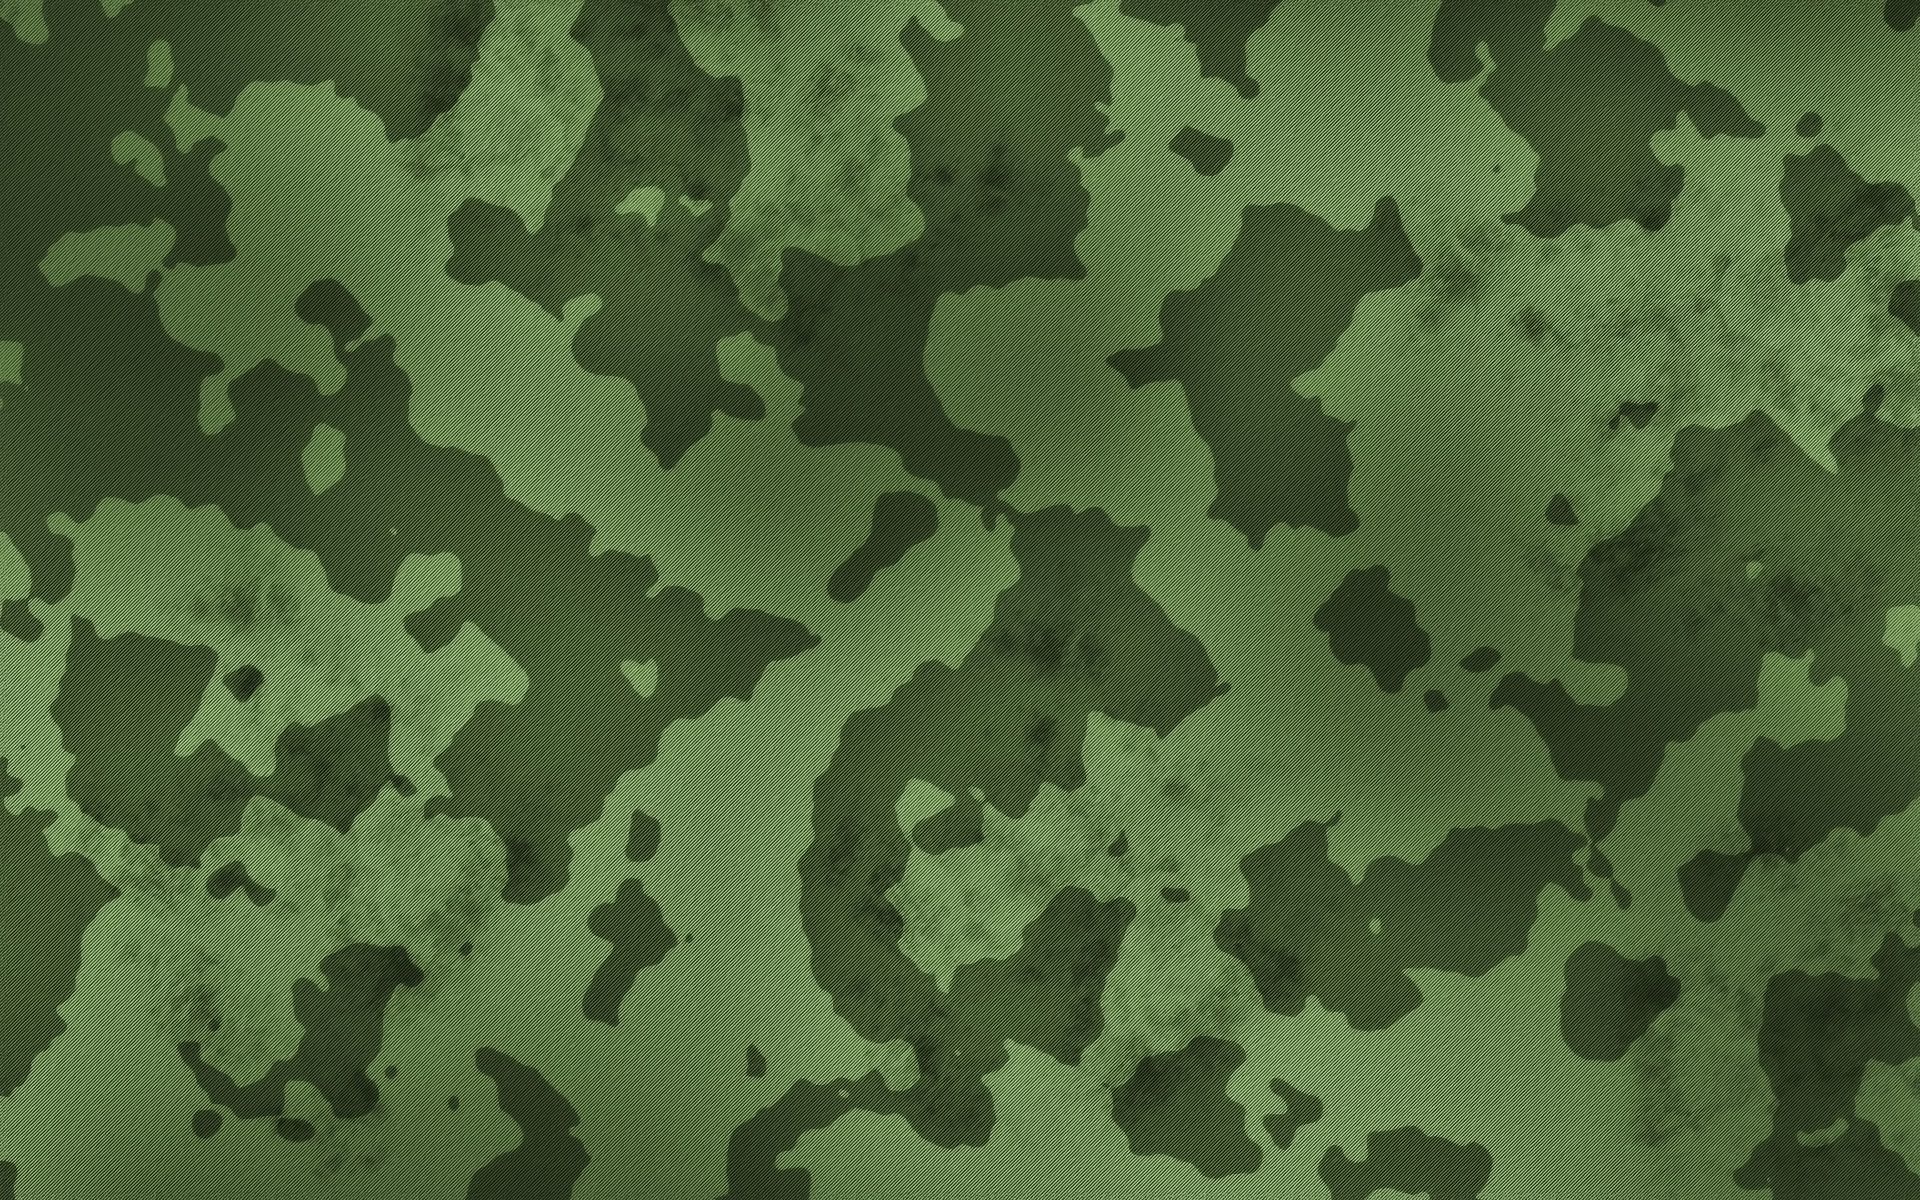 Download wallpaper grass camouflage, fabric, camouflage pattern, military camouflage, green background, green camouflage for desktop with resolution 1920x1200. High Quality HD picture wallpaper